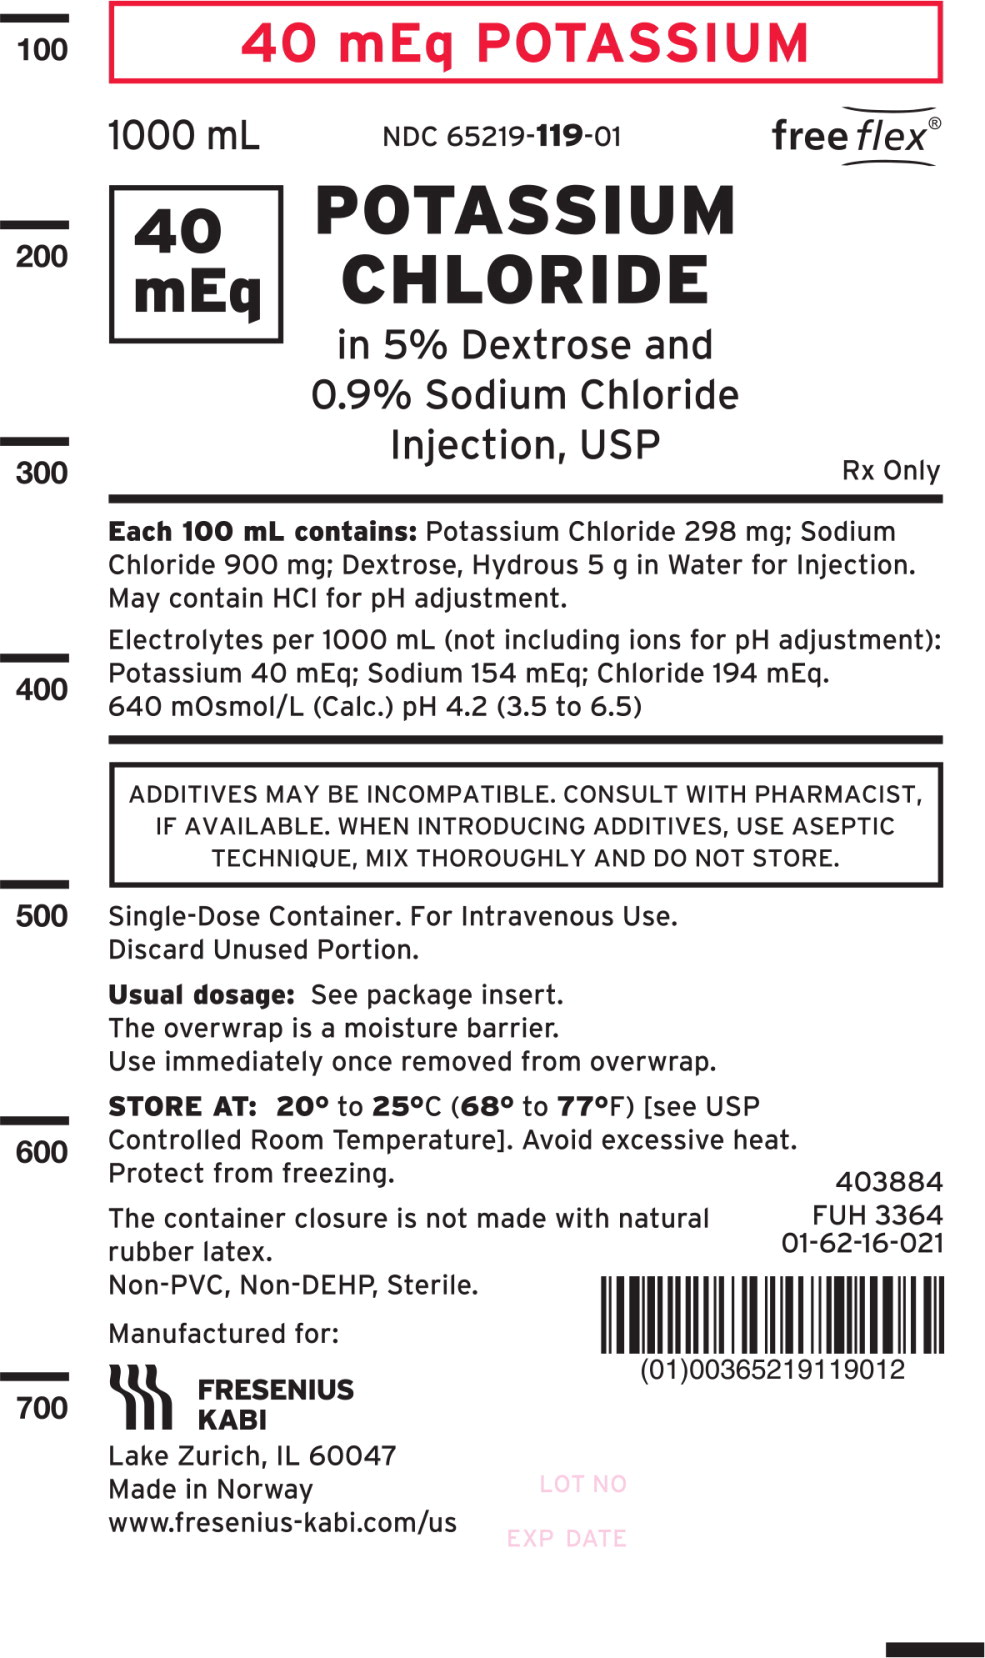 PACKAGE LABEL - PRINCIPAL DISPLAY – Potassium Chloride in 5% Dextrose and 0.9% Sodium Chloride Injection, UPS Bag Label
